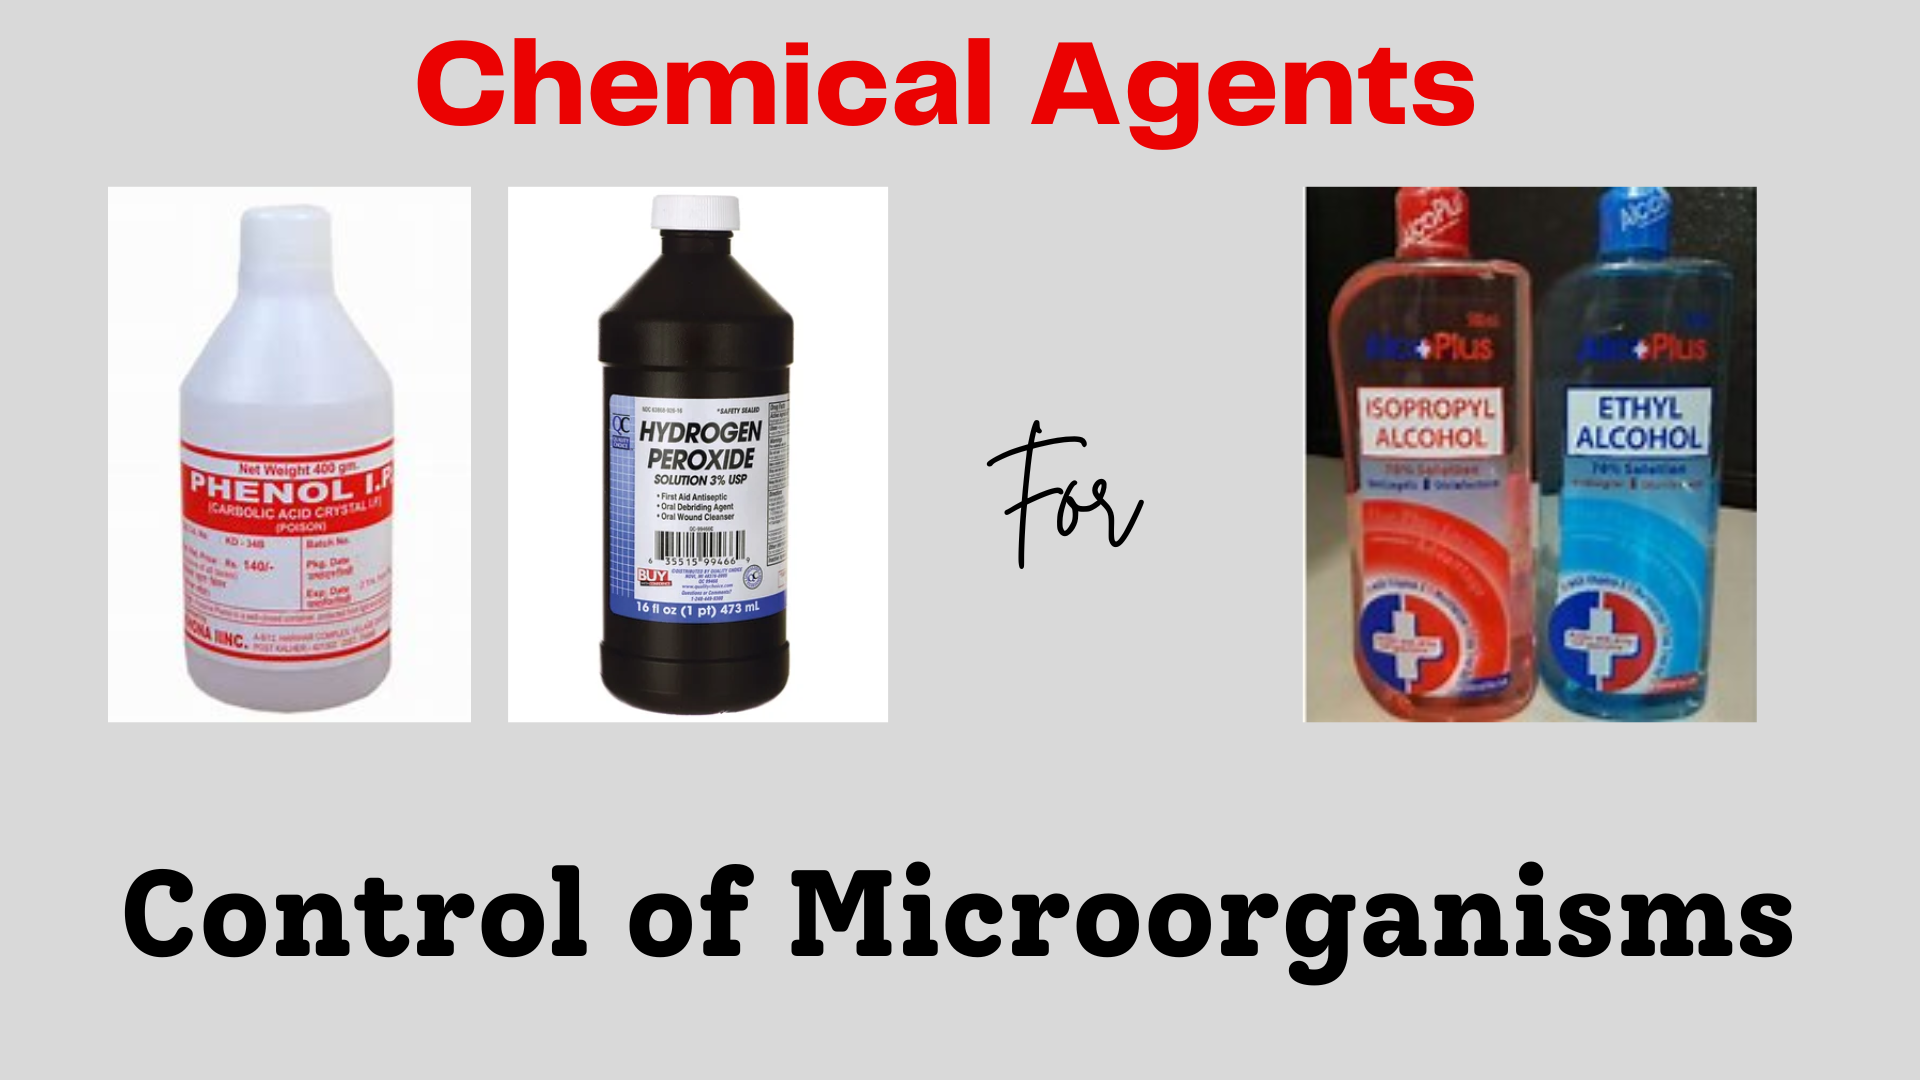 Using Chemicals to Control Microorganisms